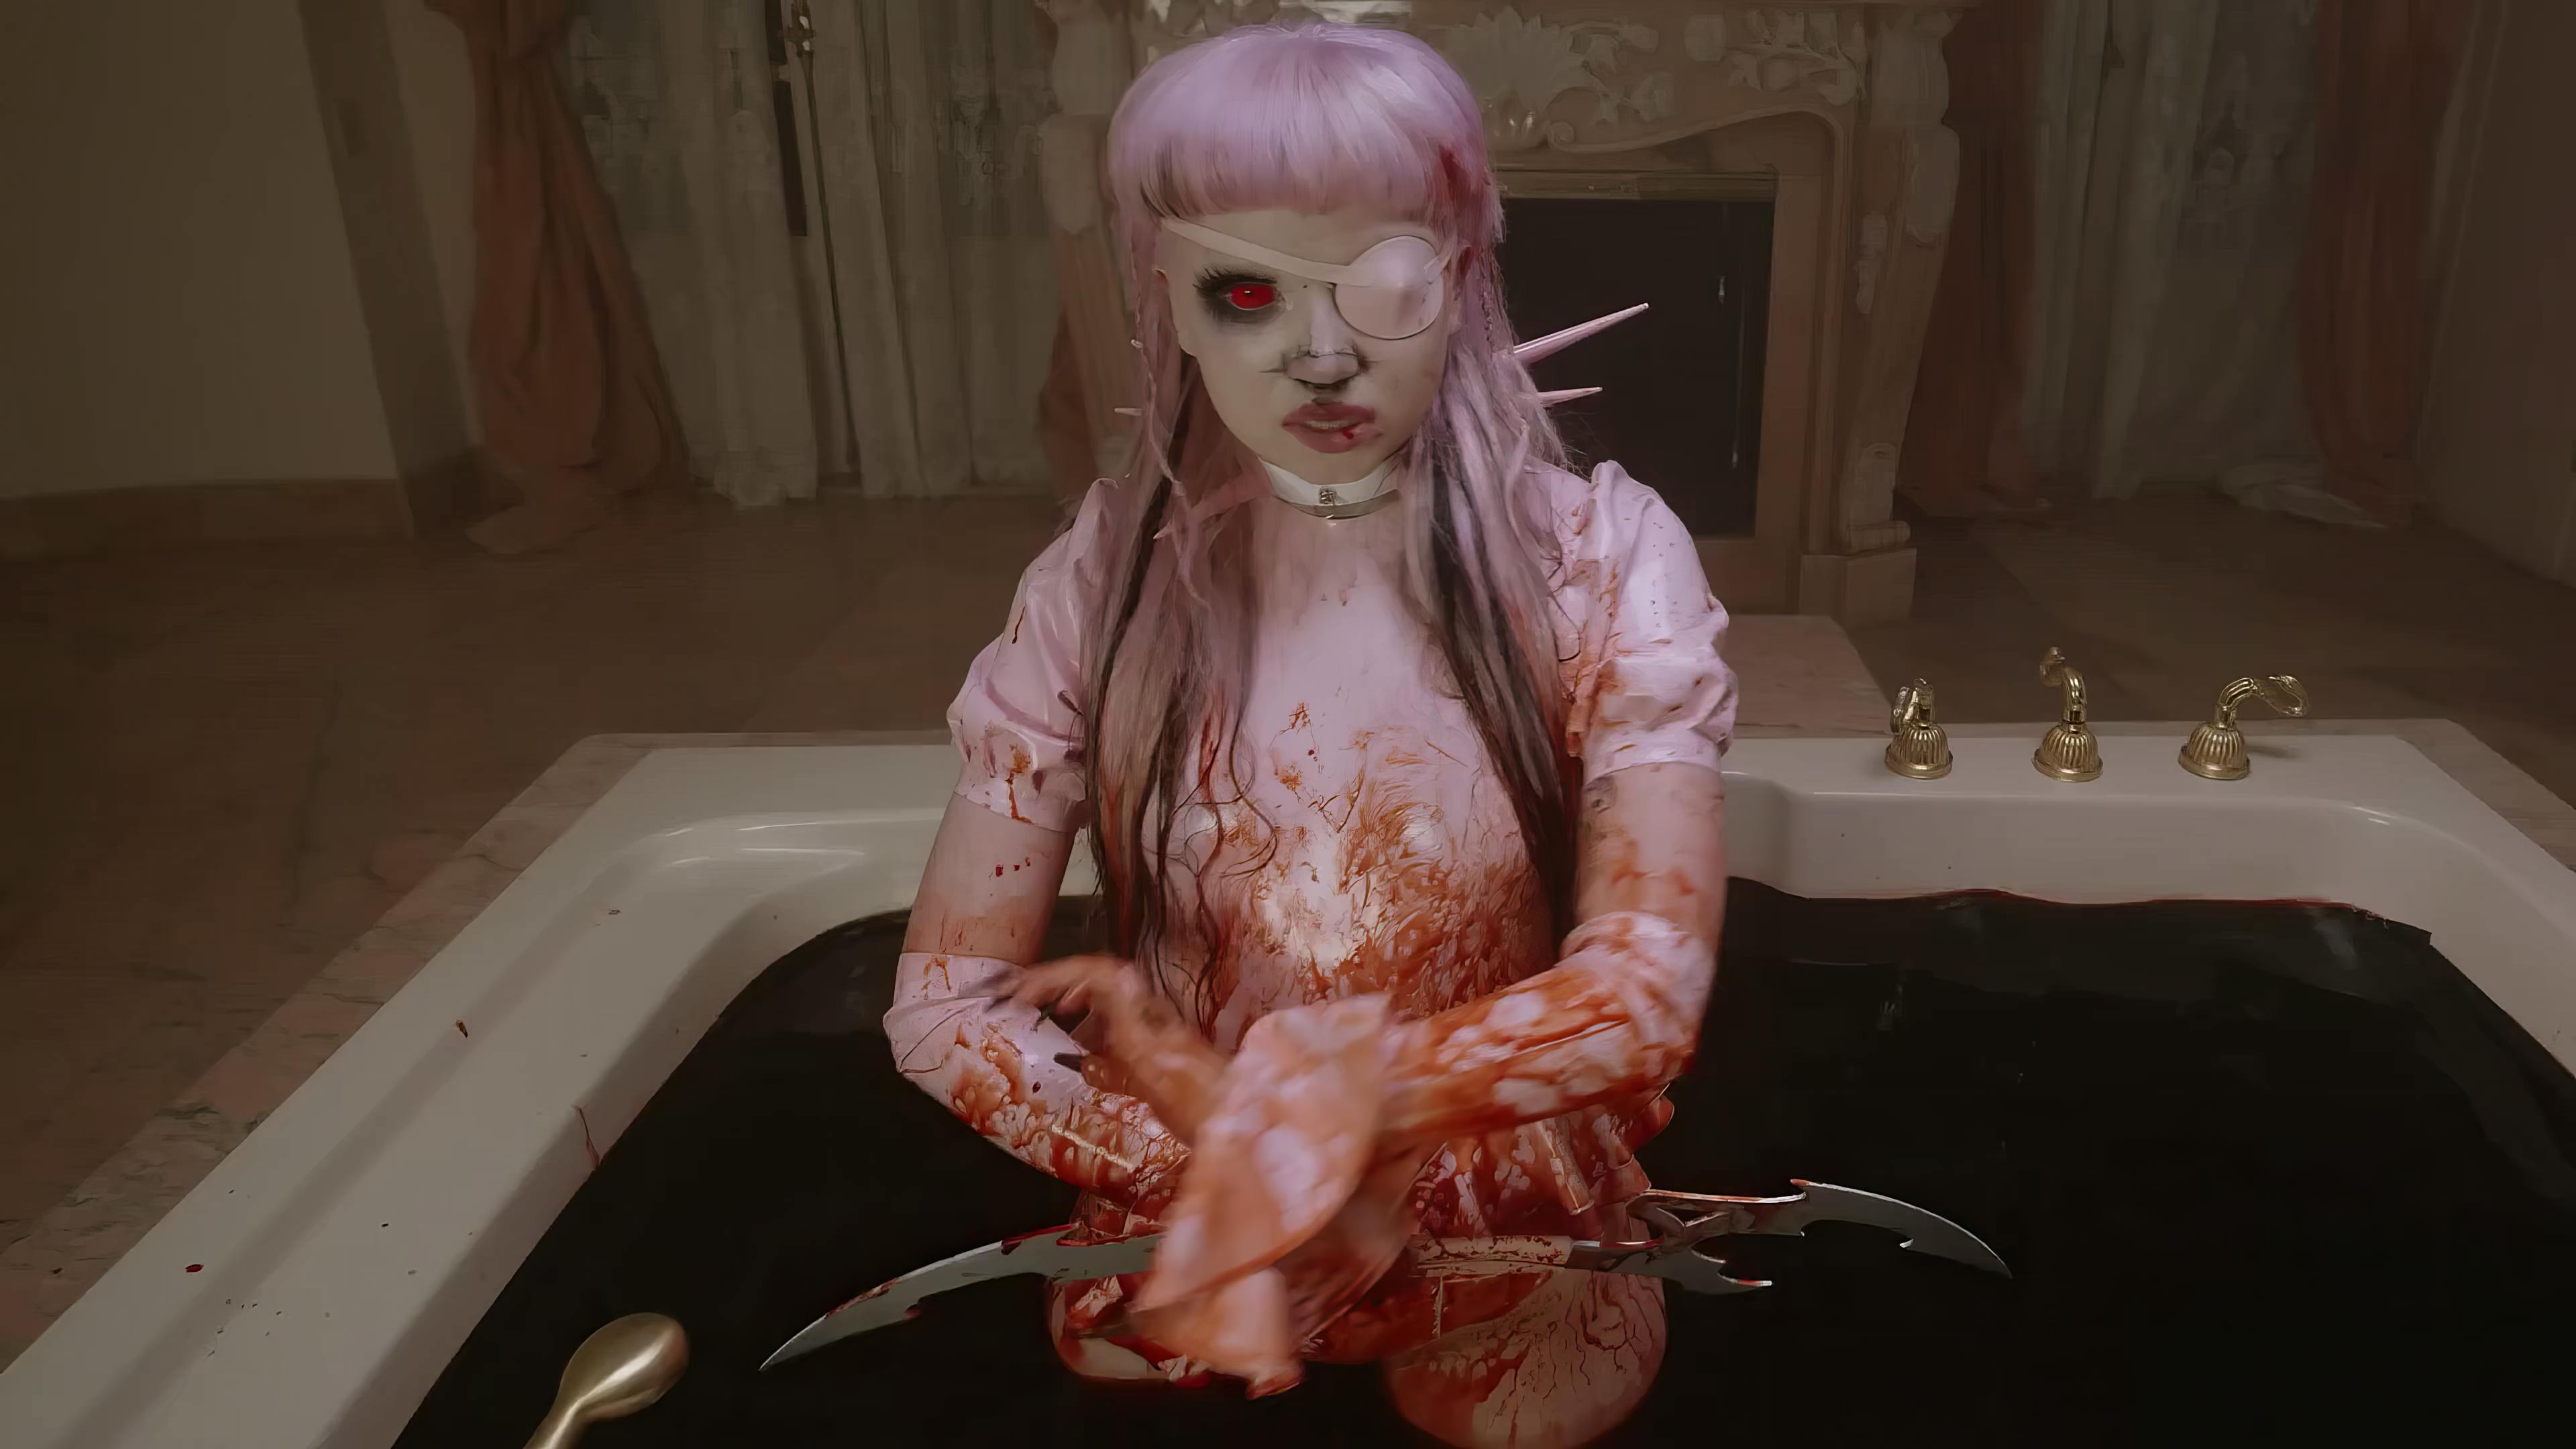 The artist, with an avant-garde appearance, is seated in a bathtub filled with blood. They have pastel pink hair and a stark white facial prosthetic covering one eye, creating a surreal and intense visual. The room's vintage decor adds to the gothic ambiance of the scene.